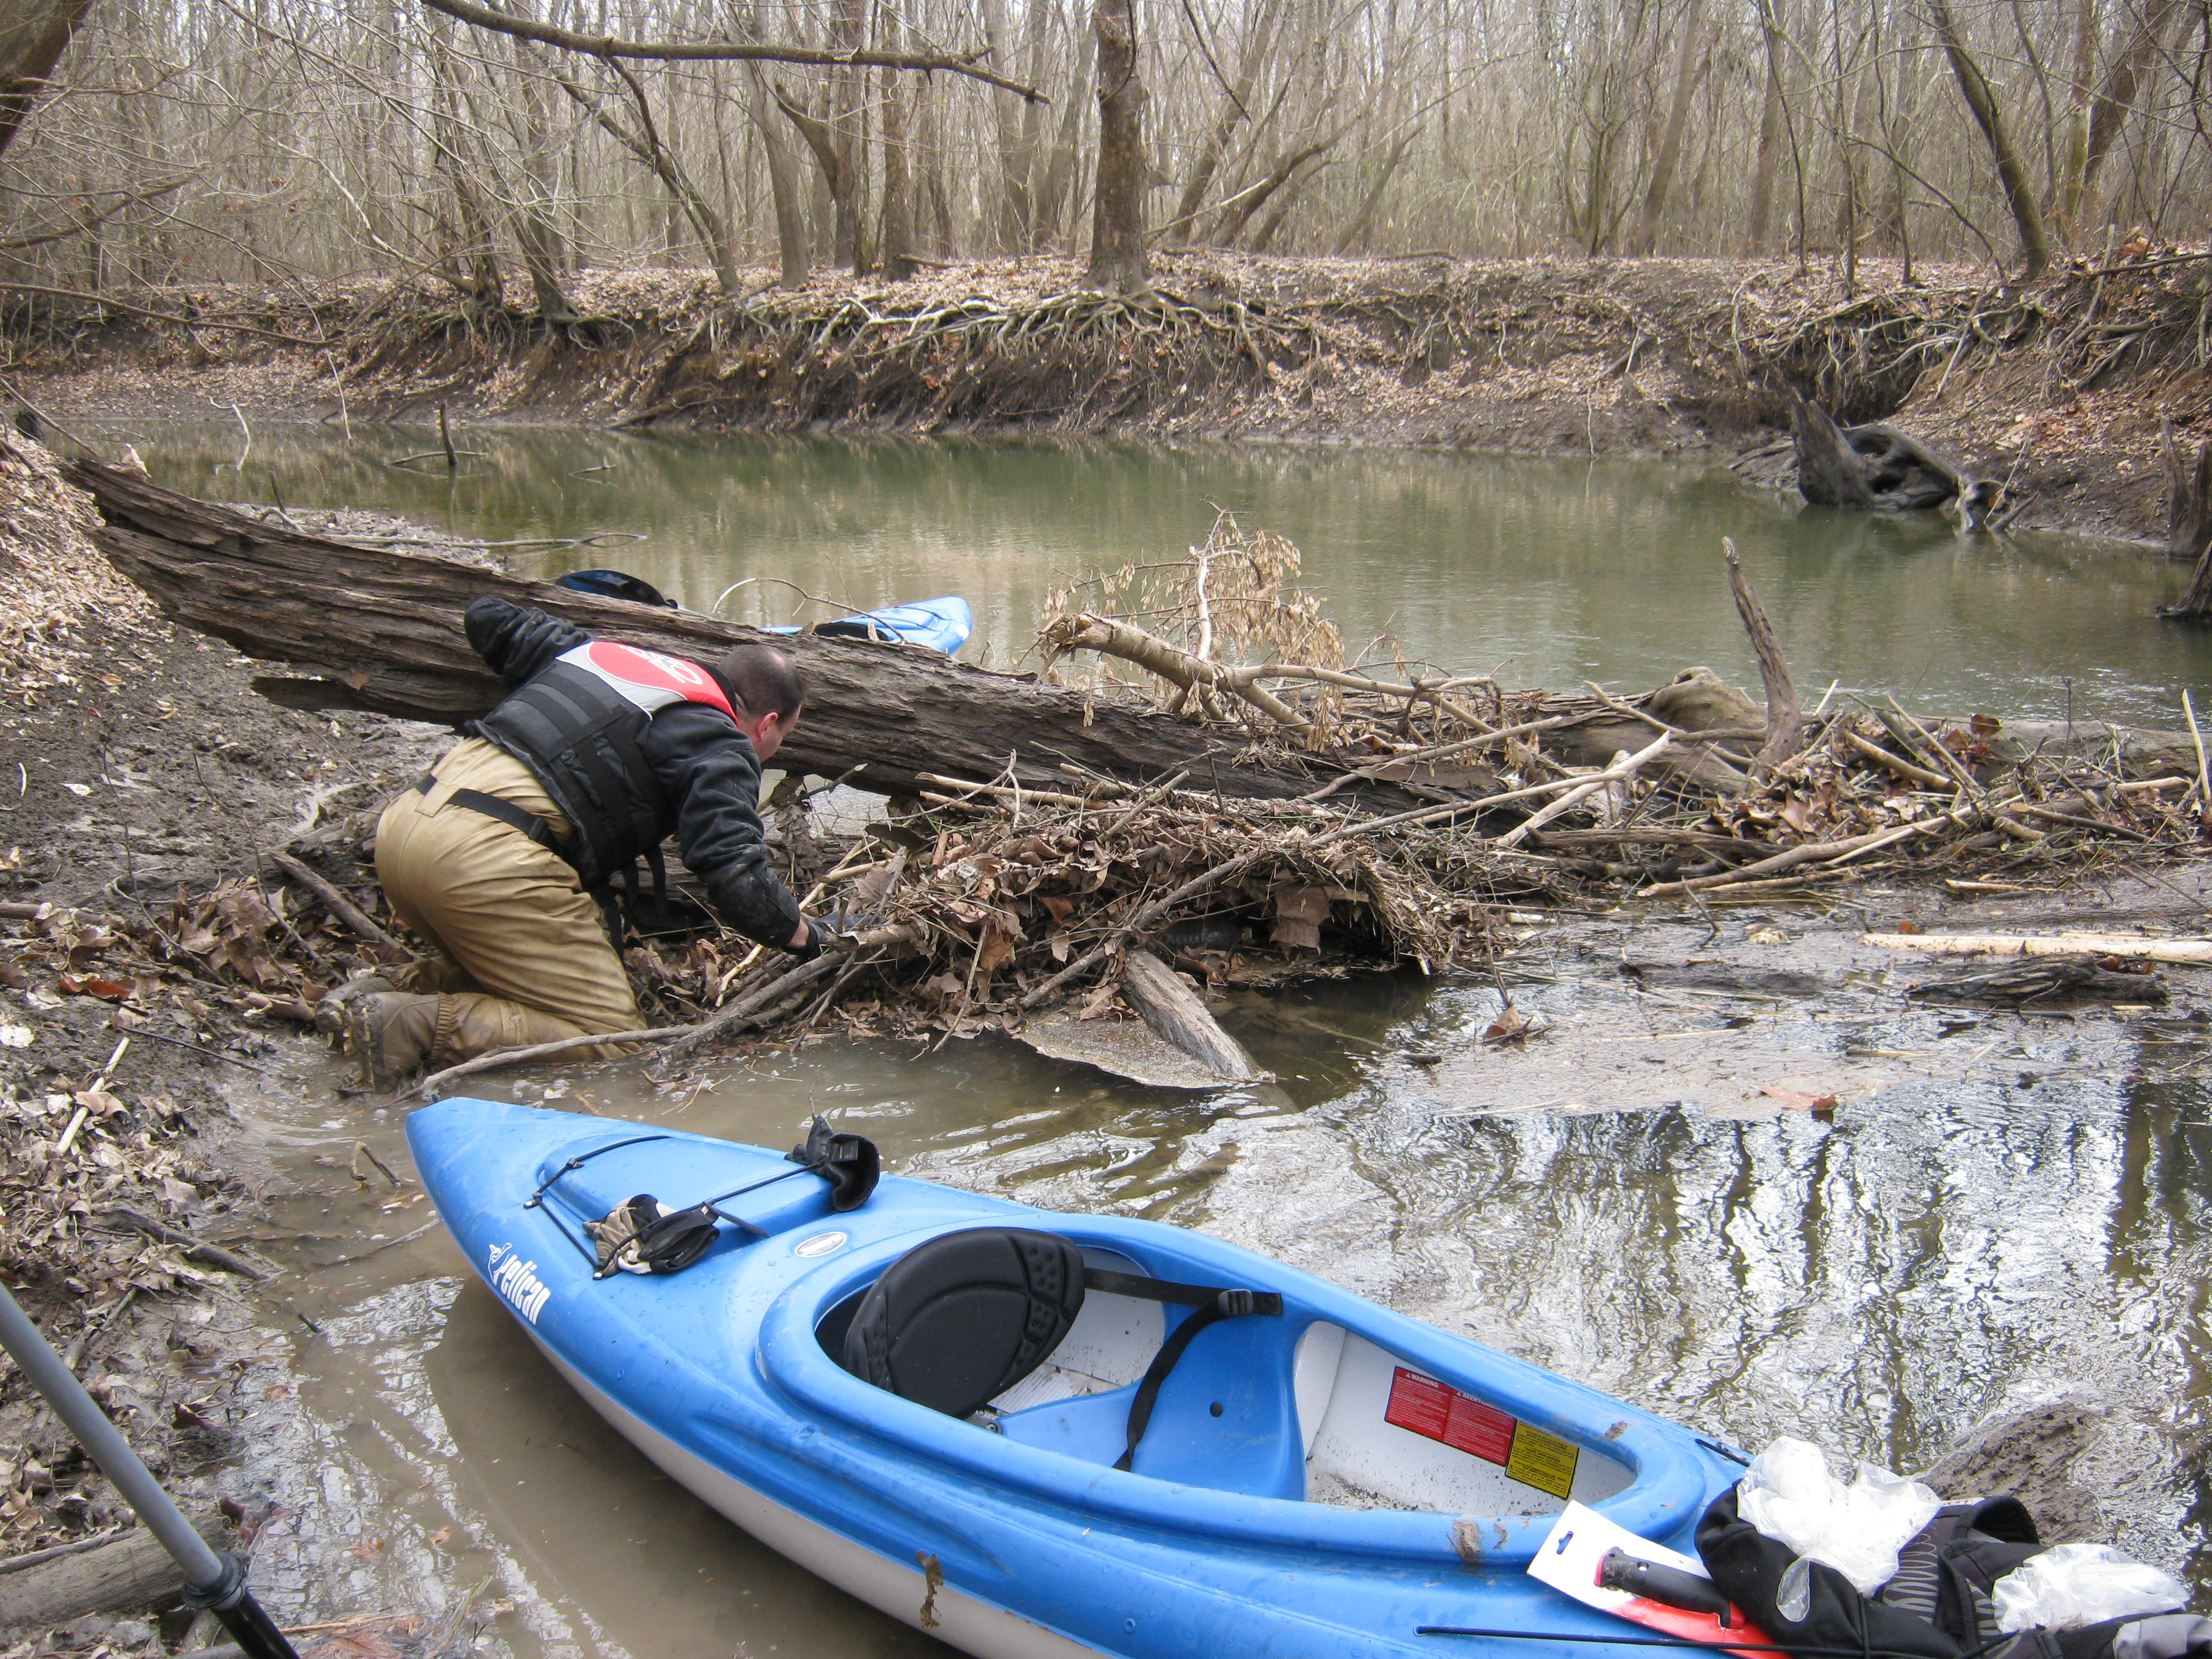 Scientist kneeling in the water at the edge of a creek, closely examining a fallen log